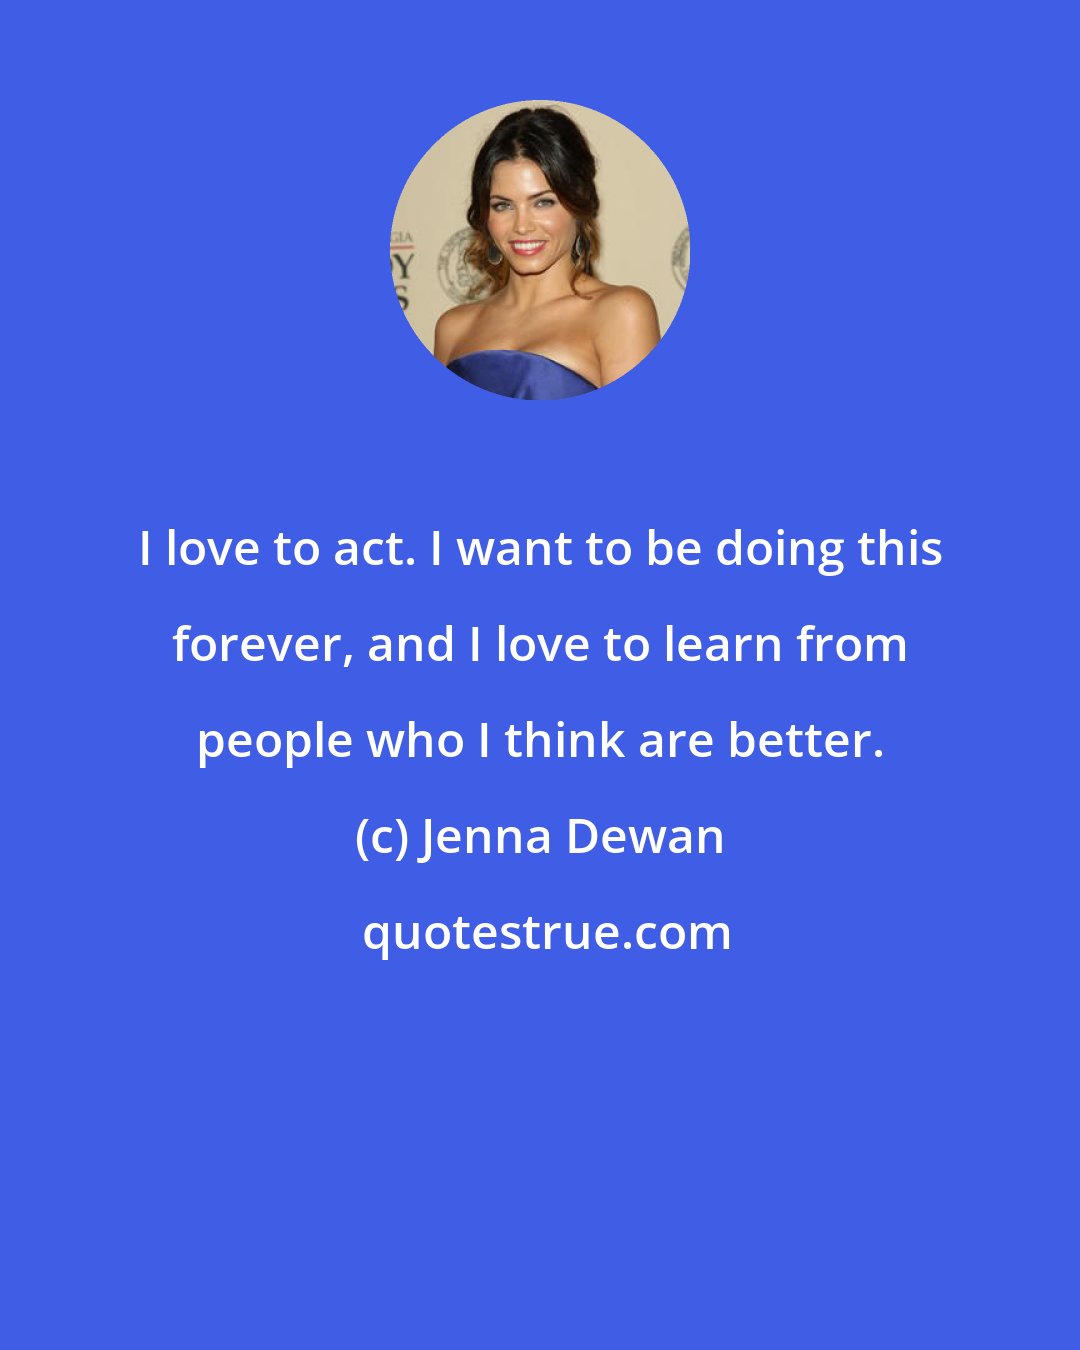 Jenna Dewan: I love to act. I want to be doing this forever, and I love to learn from people who I think are better.